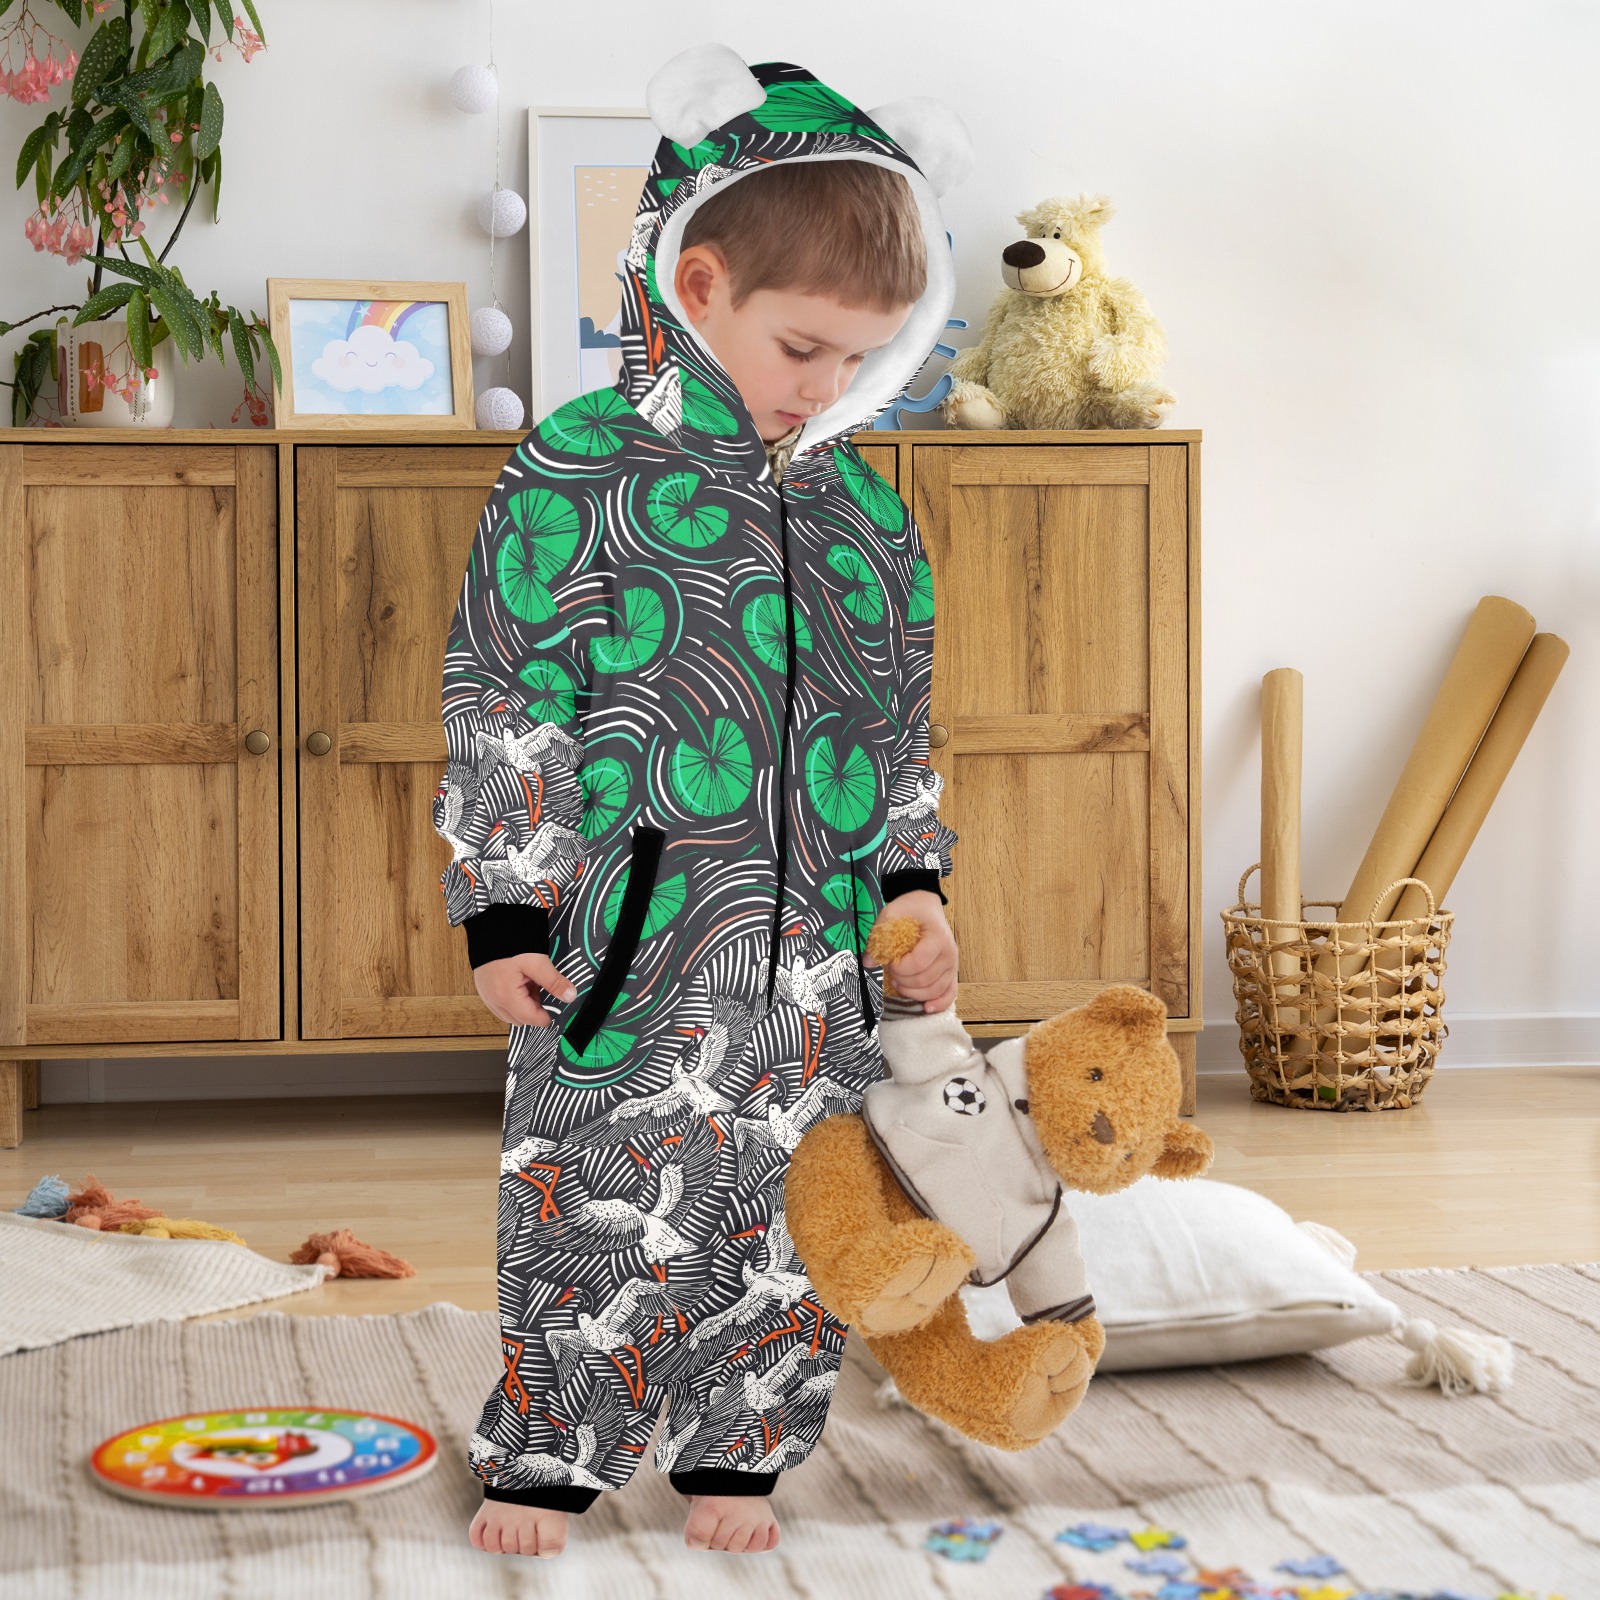 Flying cranes at night One-Piece Zip up Hooded Pajamas for Little Kids